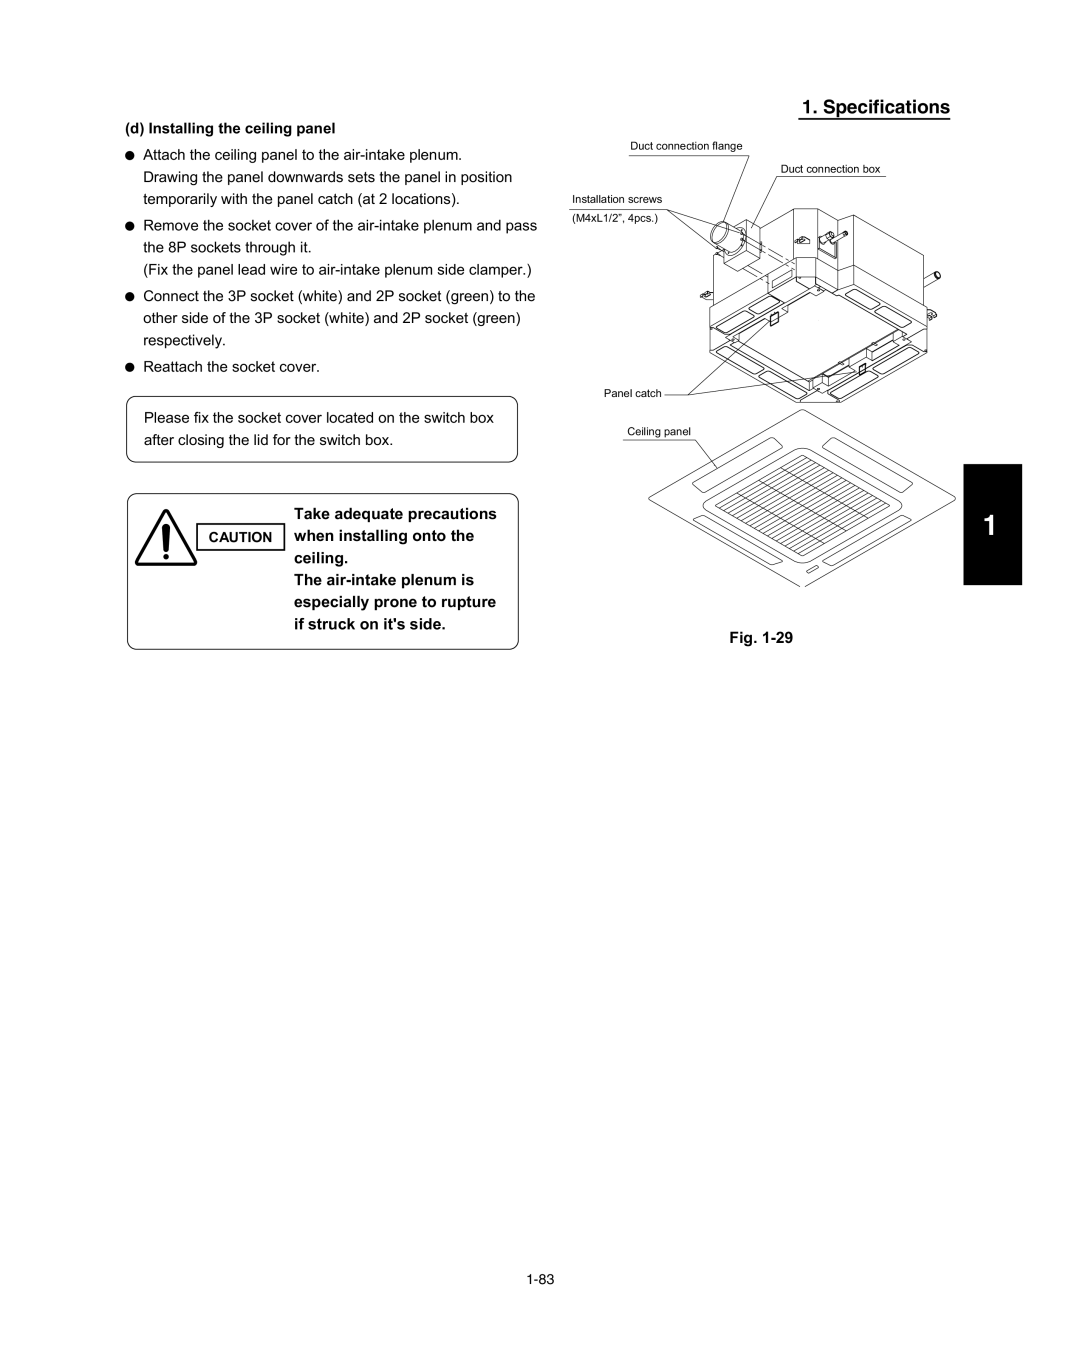 Panasonic R410A service manual Specifications, d Installing the ceiling panel, Fig 